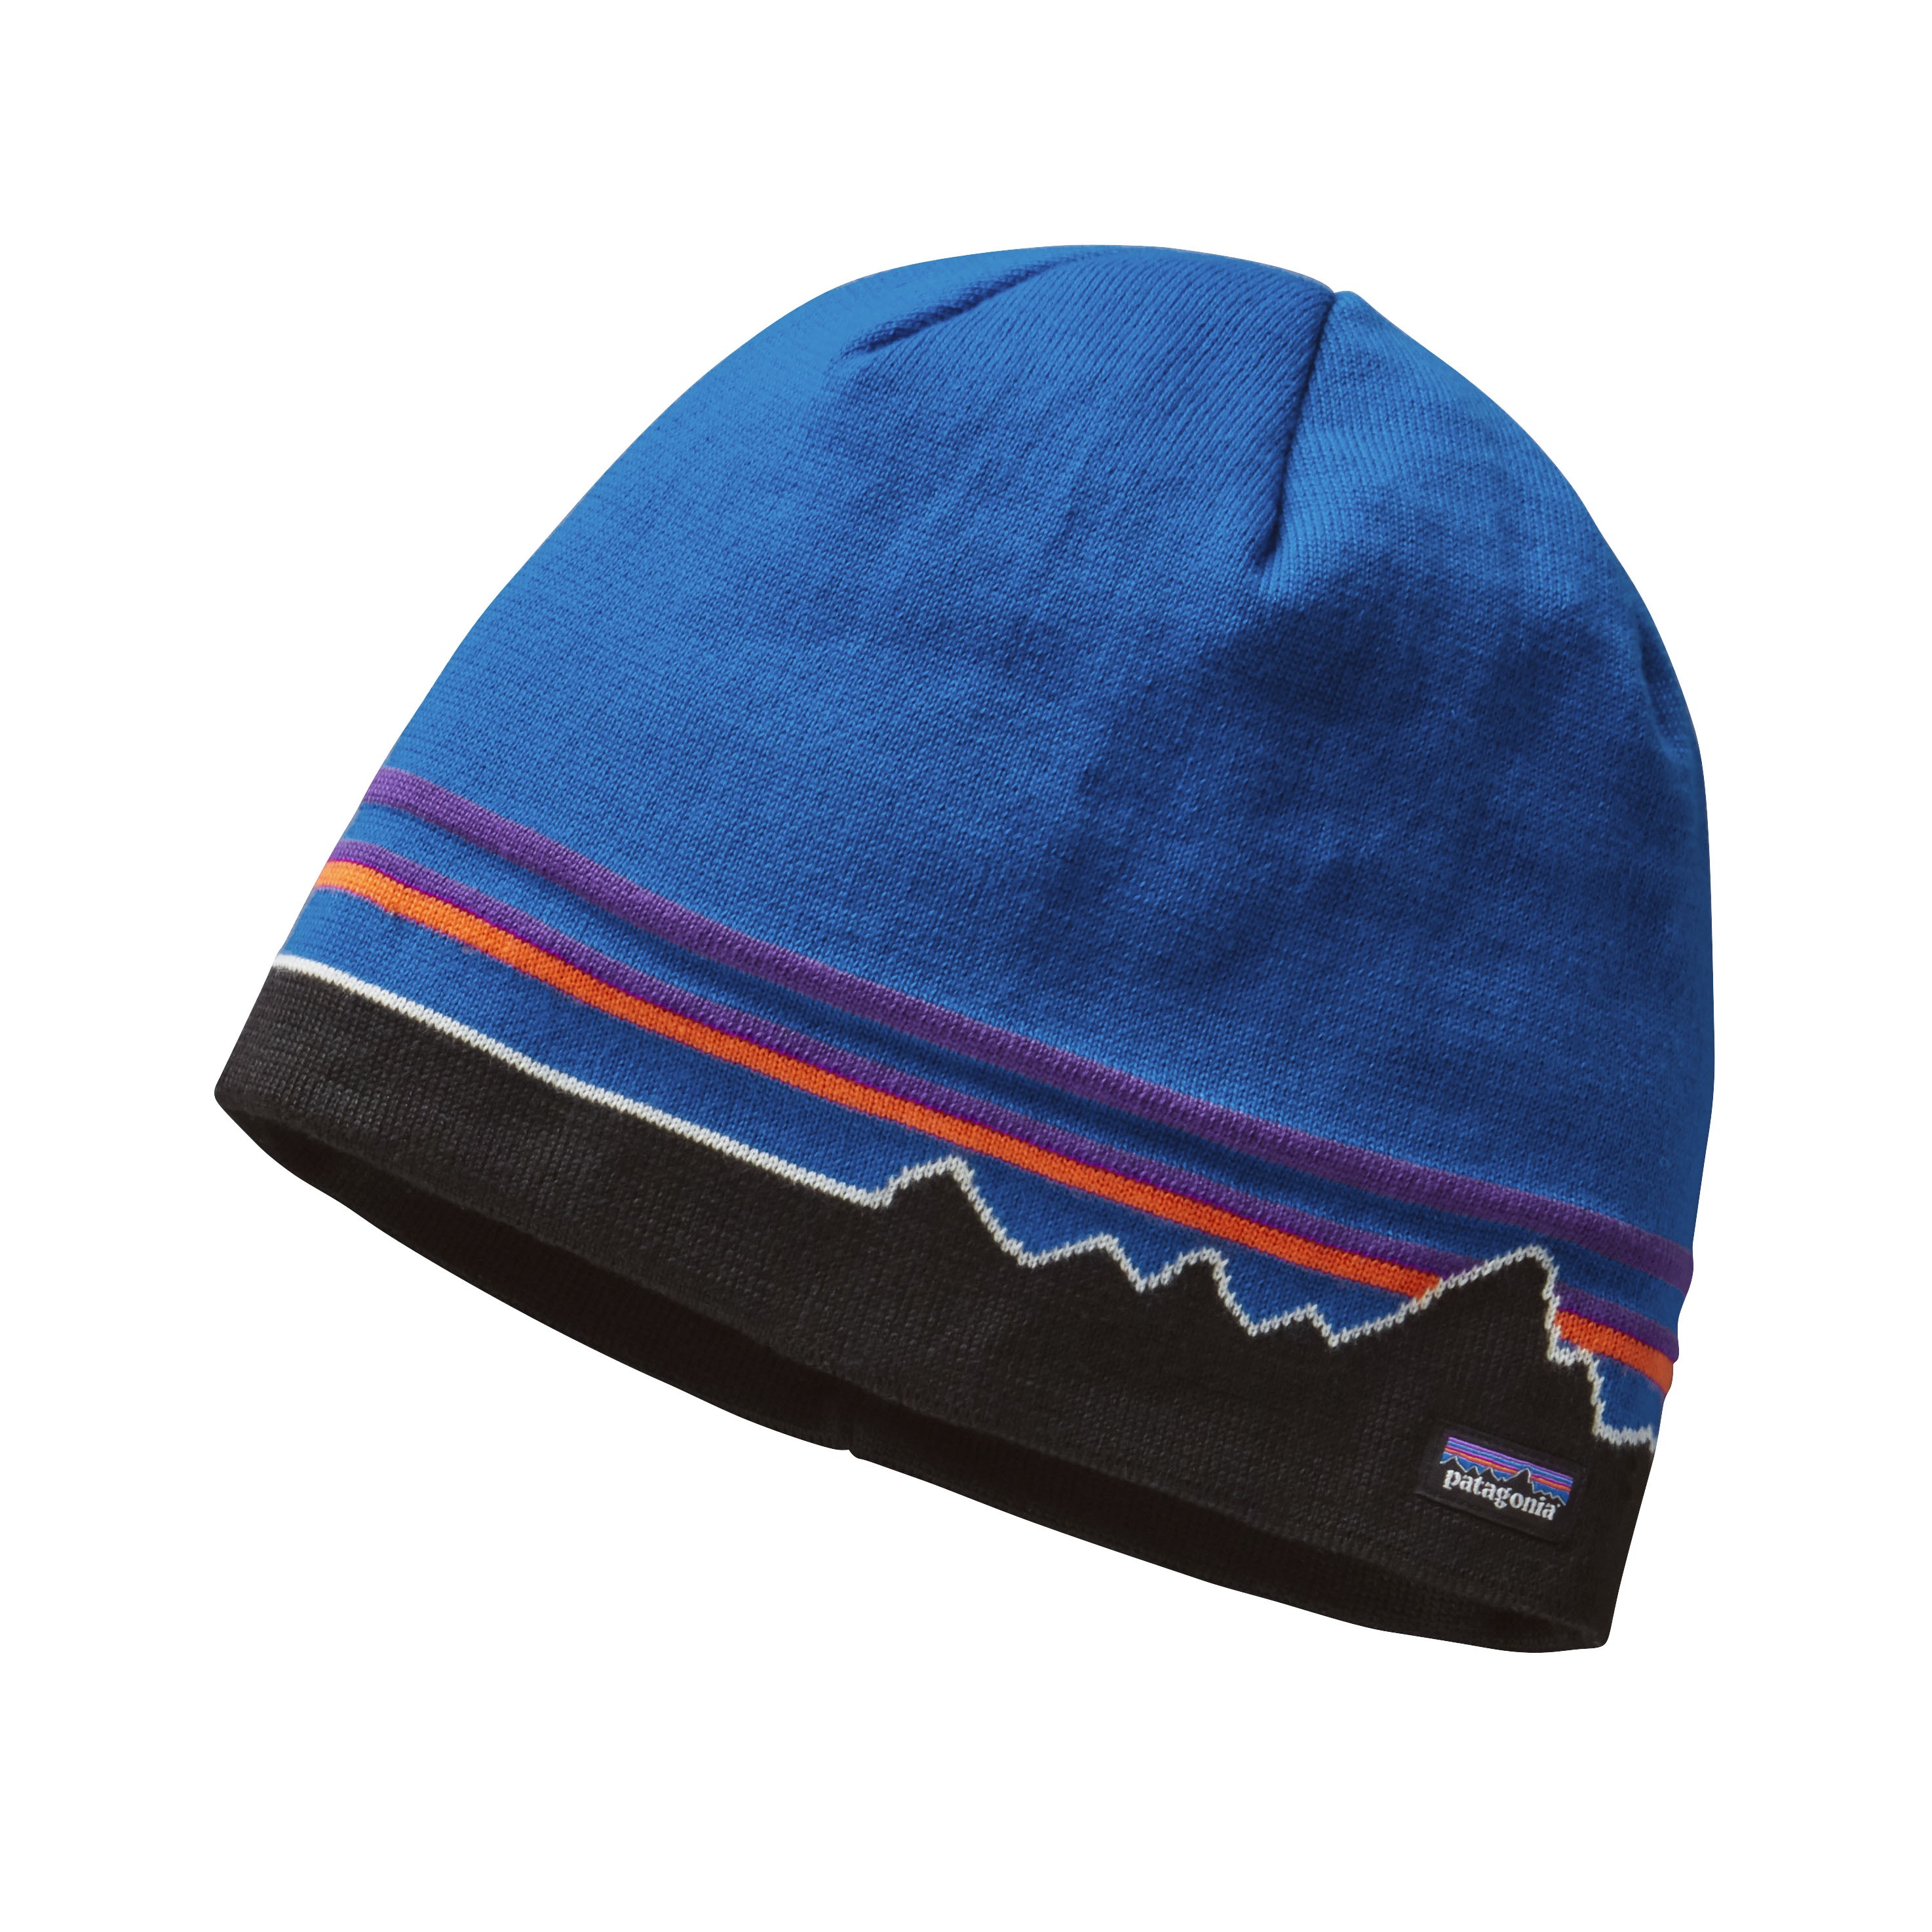 Patagonia Beanie Hat-Fitz Roy Line : Andes Blue-One Size